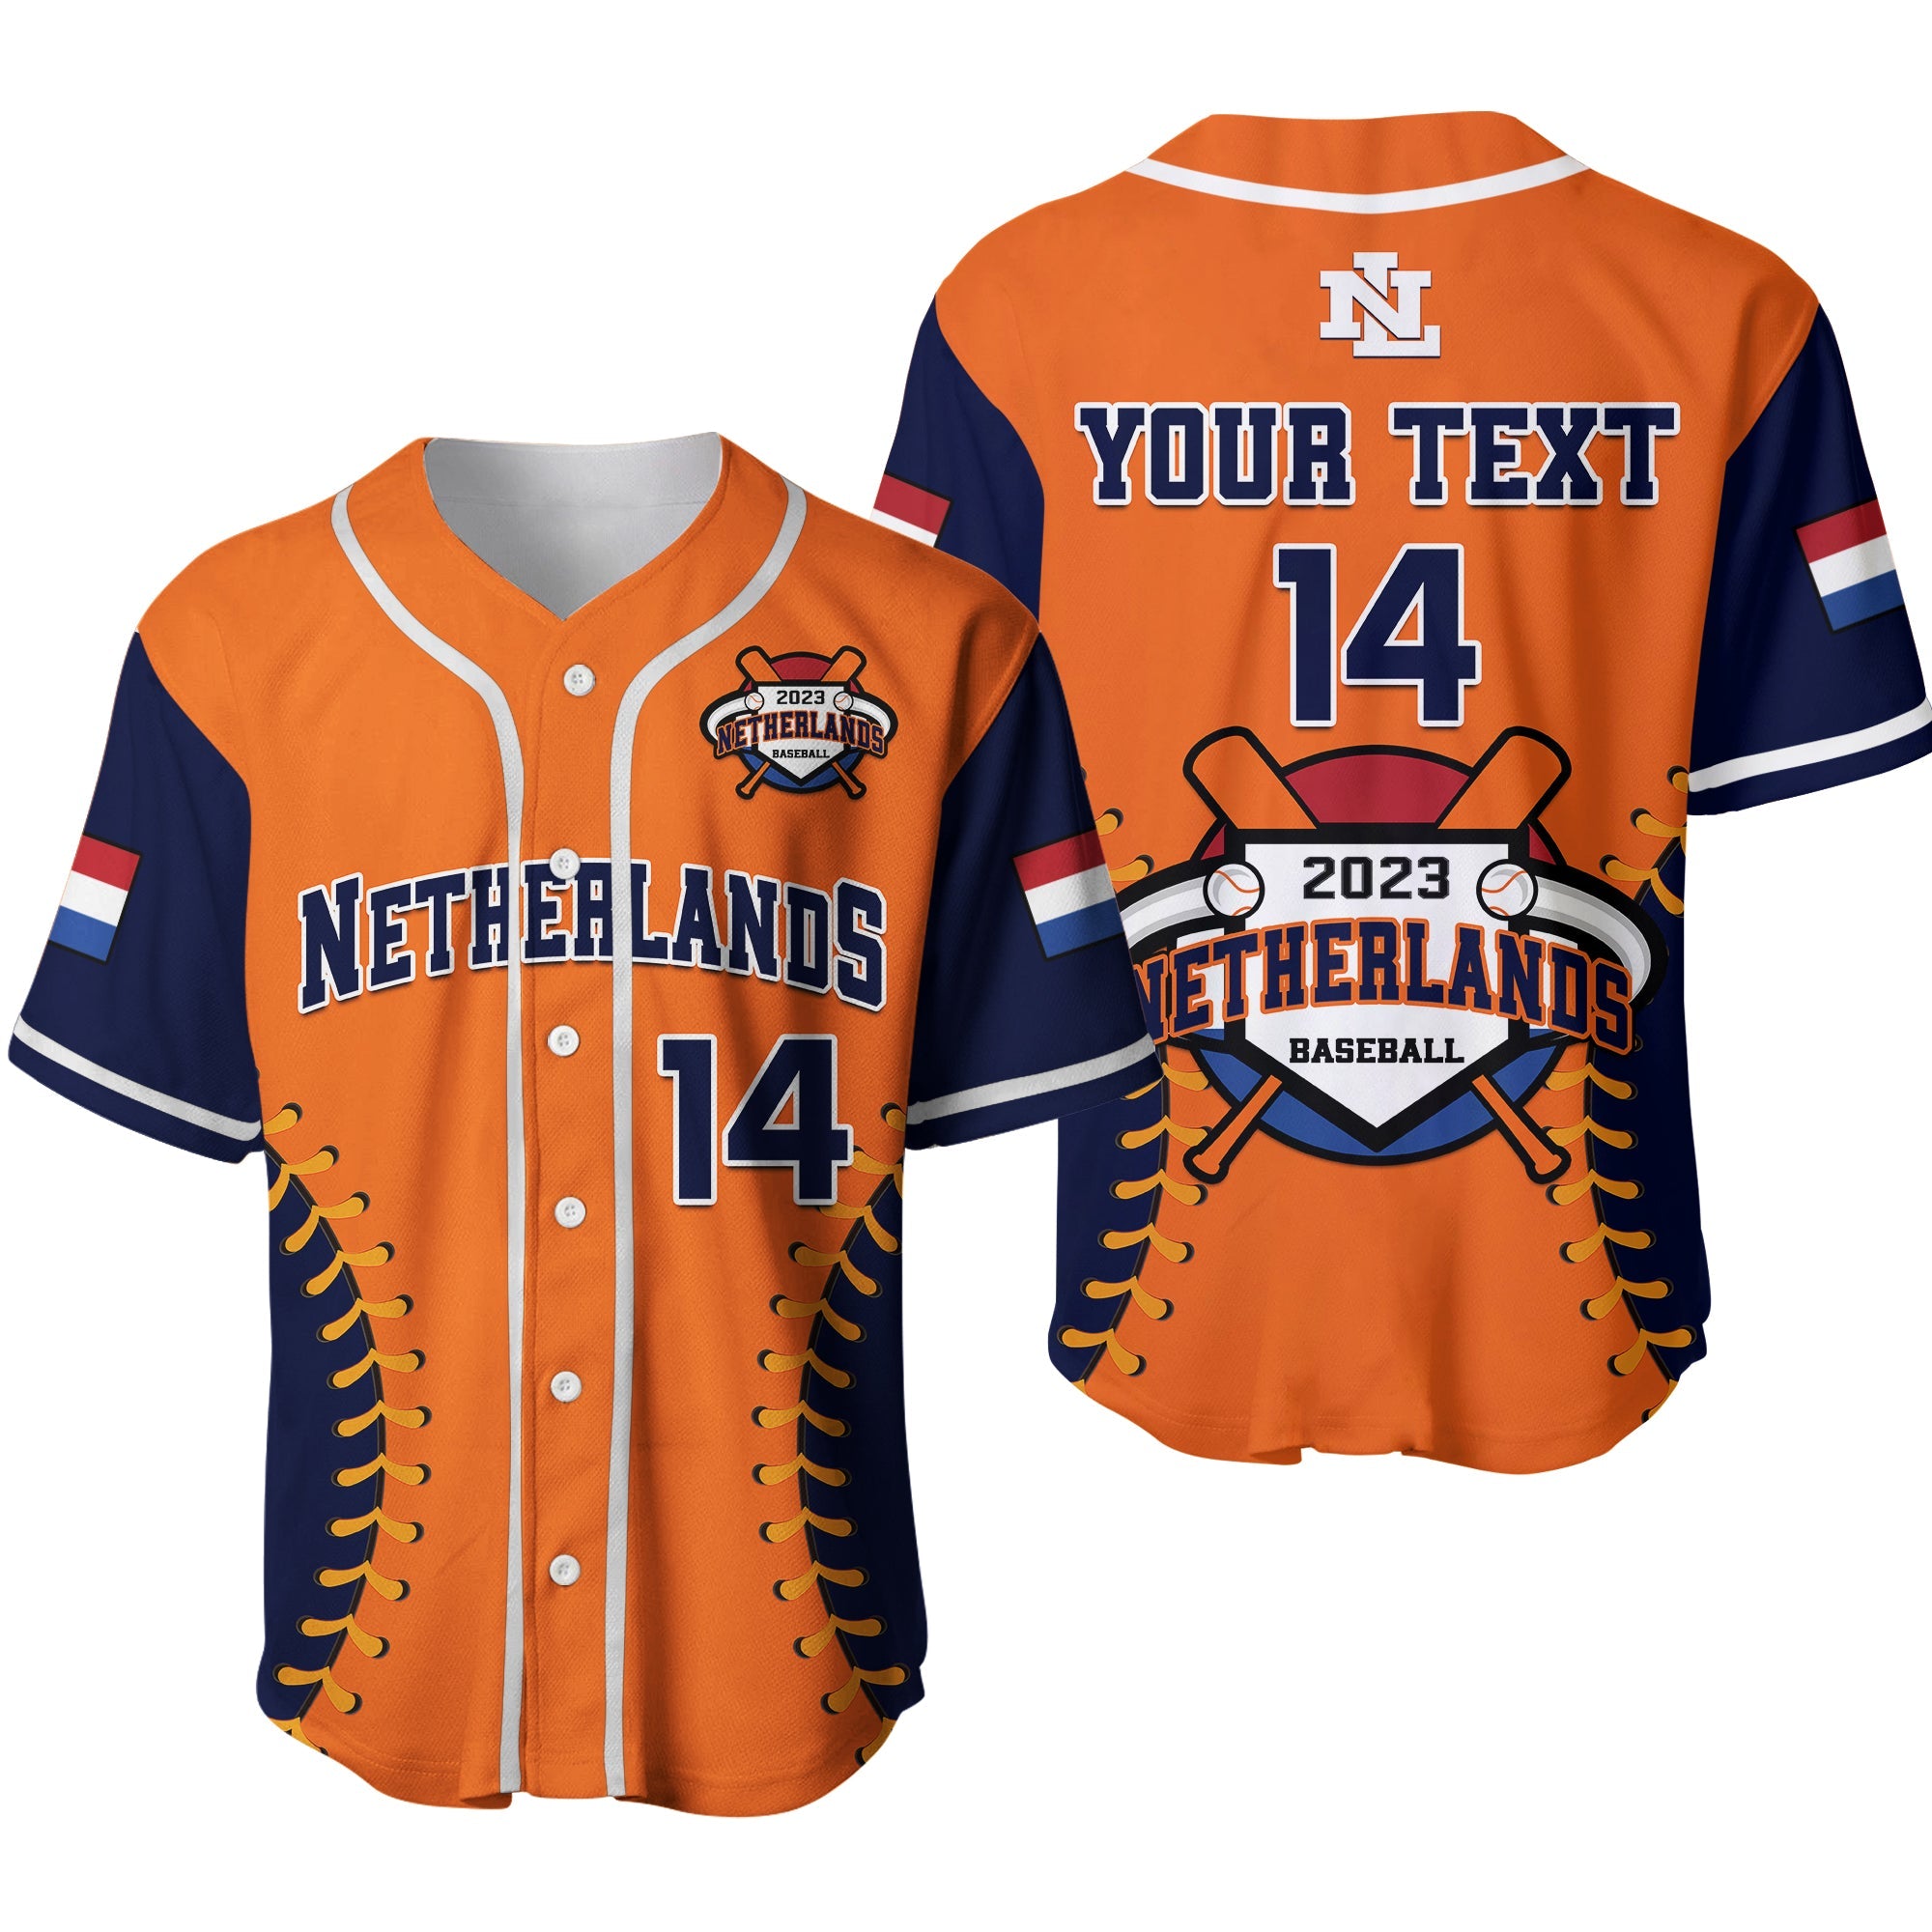 custom-text-and-number-netherlands-baseball-2023-baseball-jersey-sporty-style-ver02